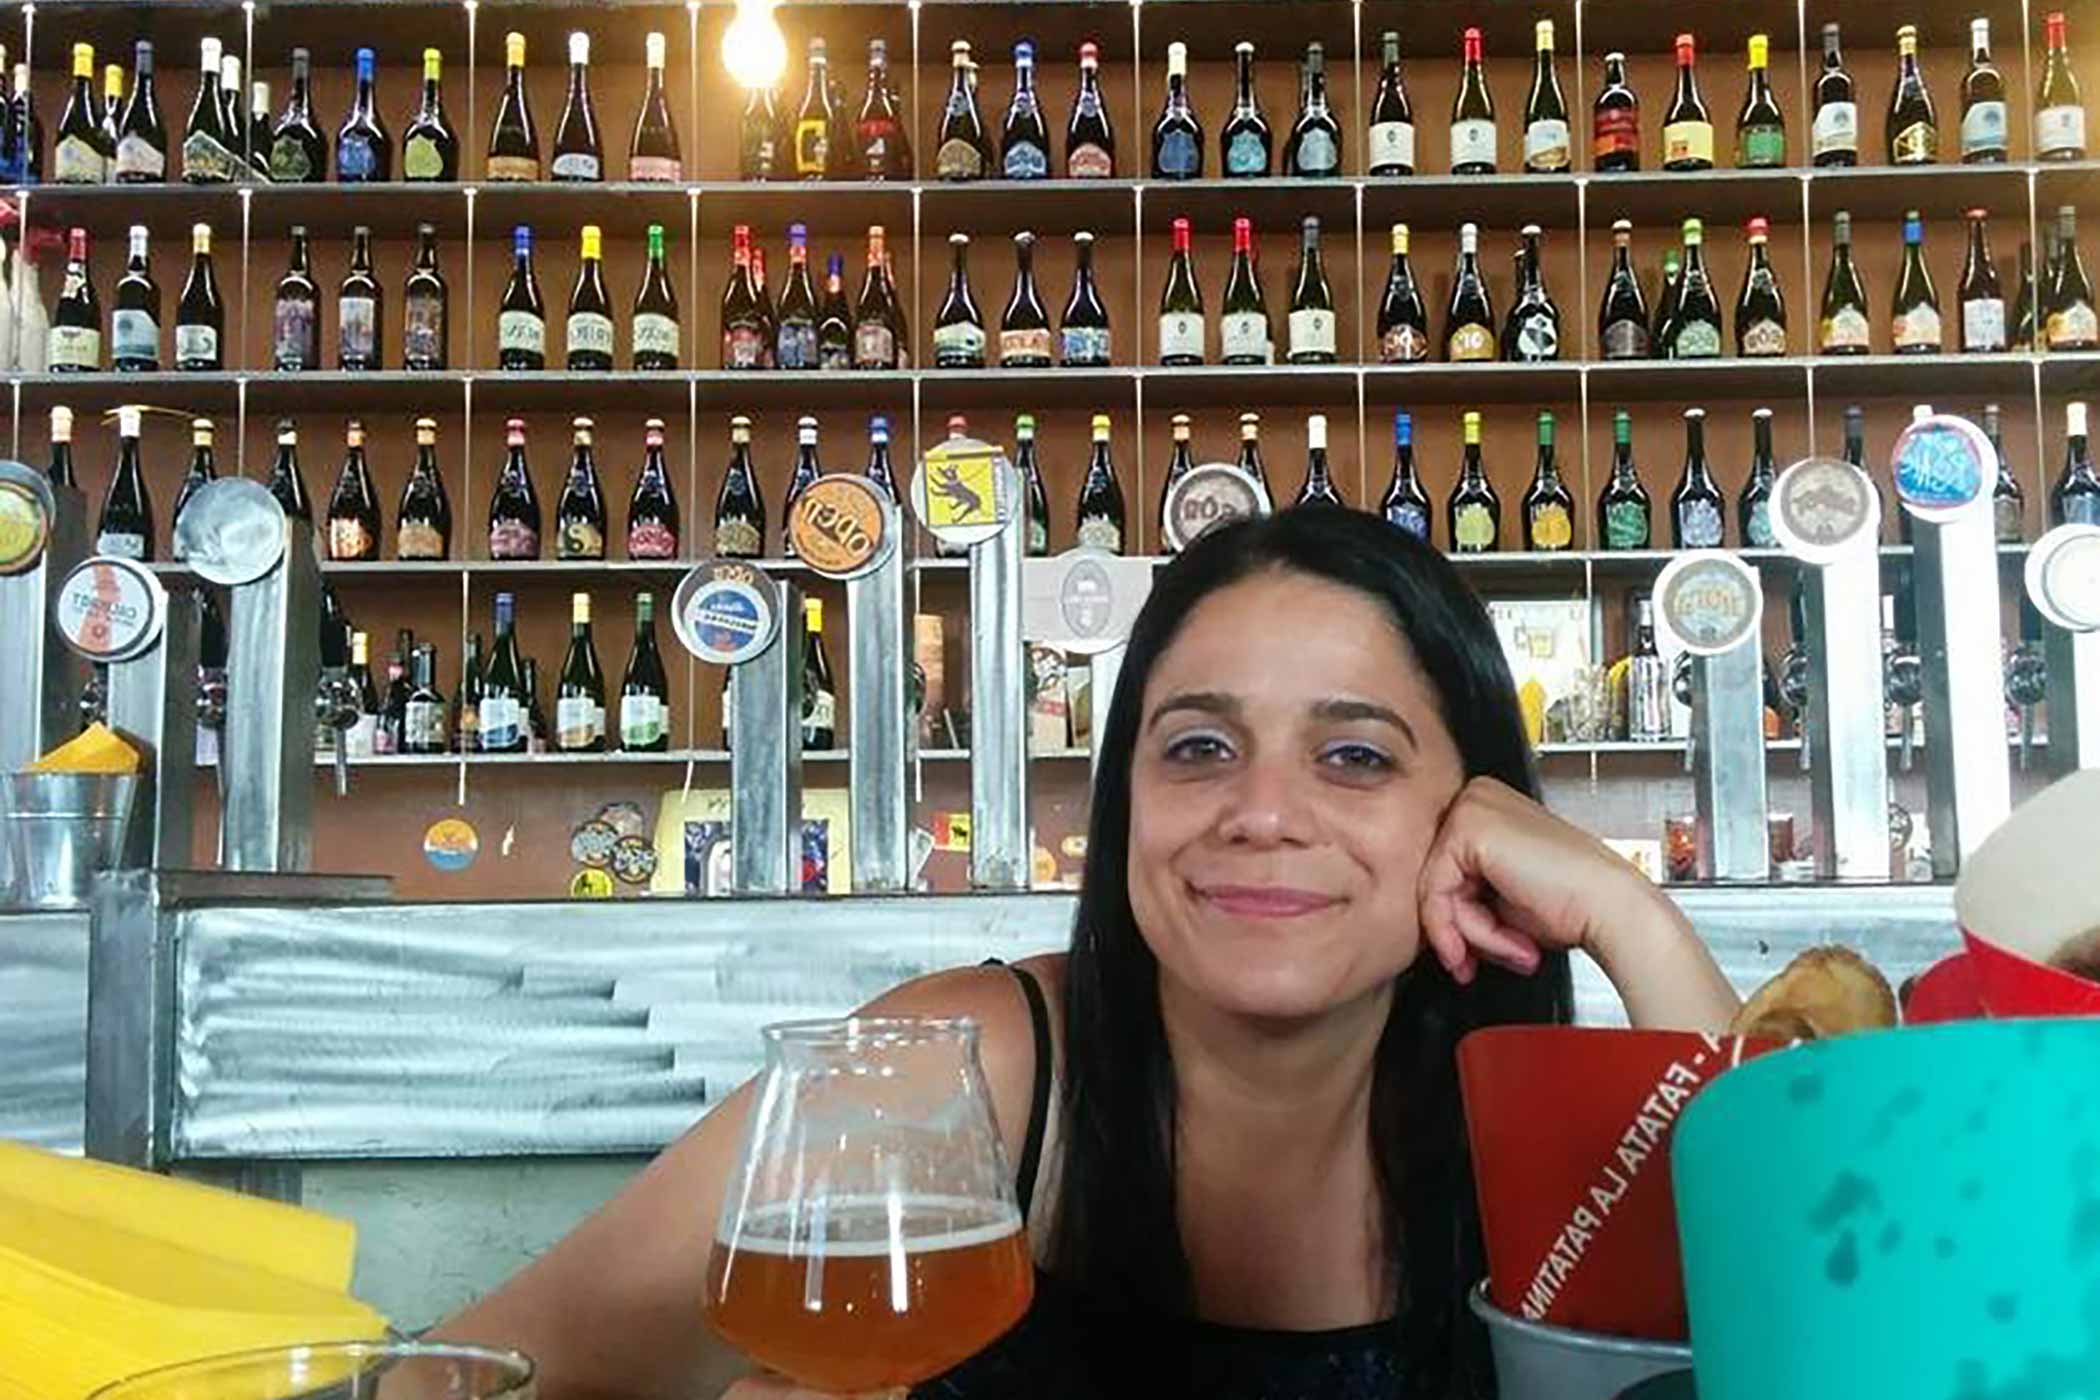 Beerternational: An Israeli Woman Meets a Brazilian Woman in France, Bringing Her Japanese-Inspired Beers to the U.S.